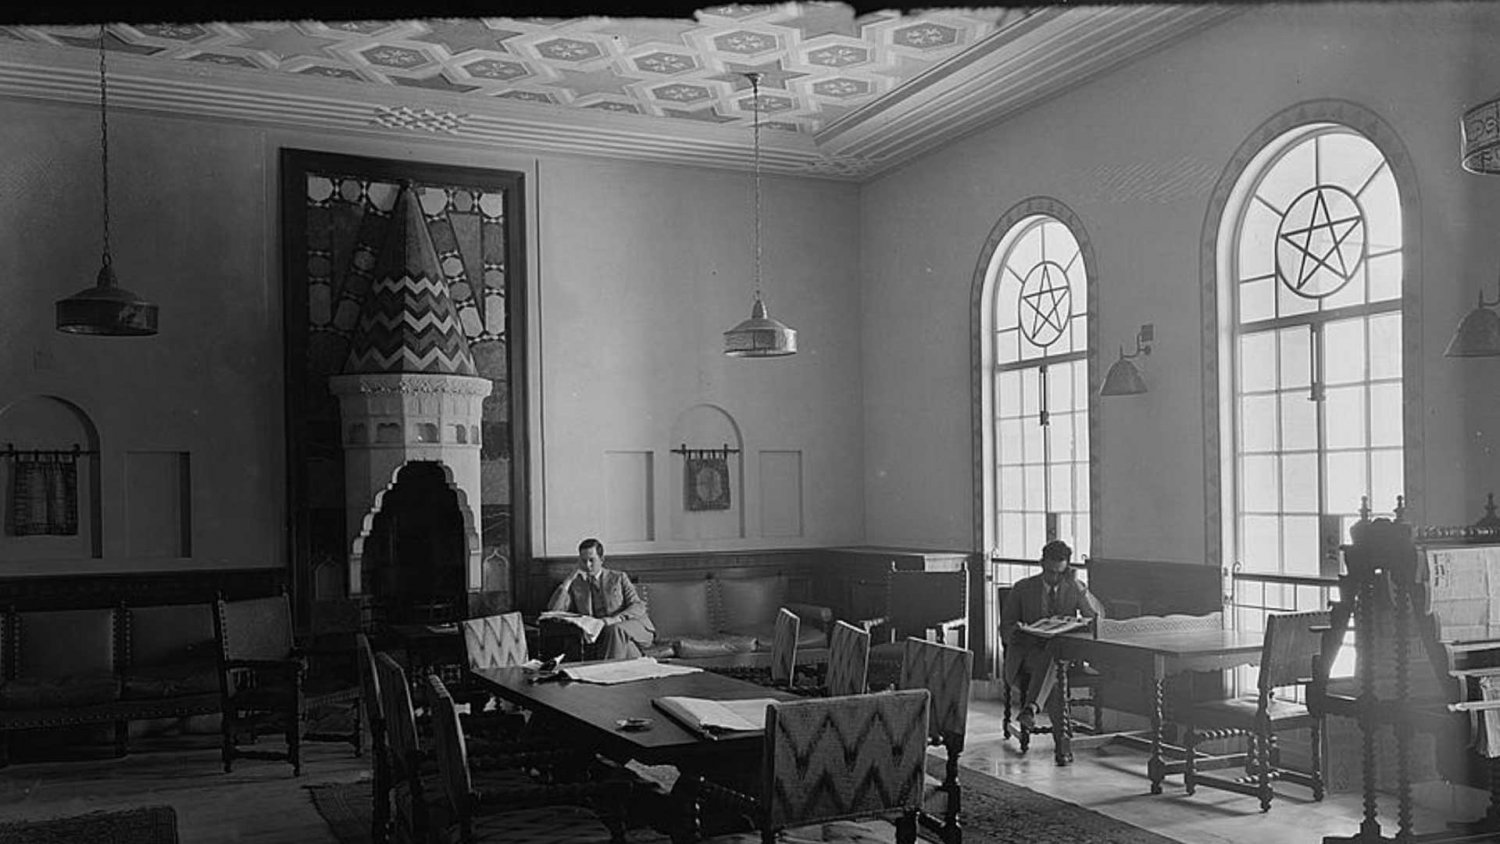 Jerusalem YMCA reading room and fireplace, 1933 or 1934